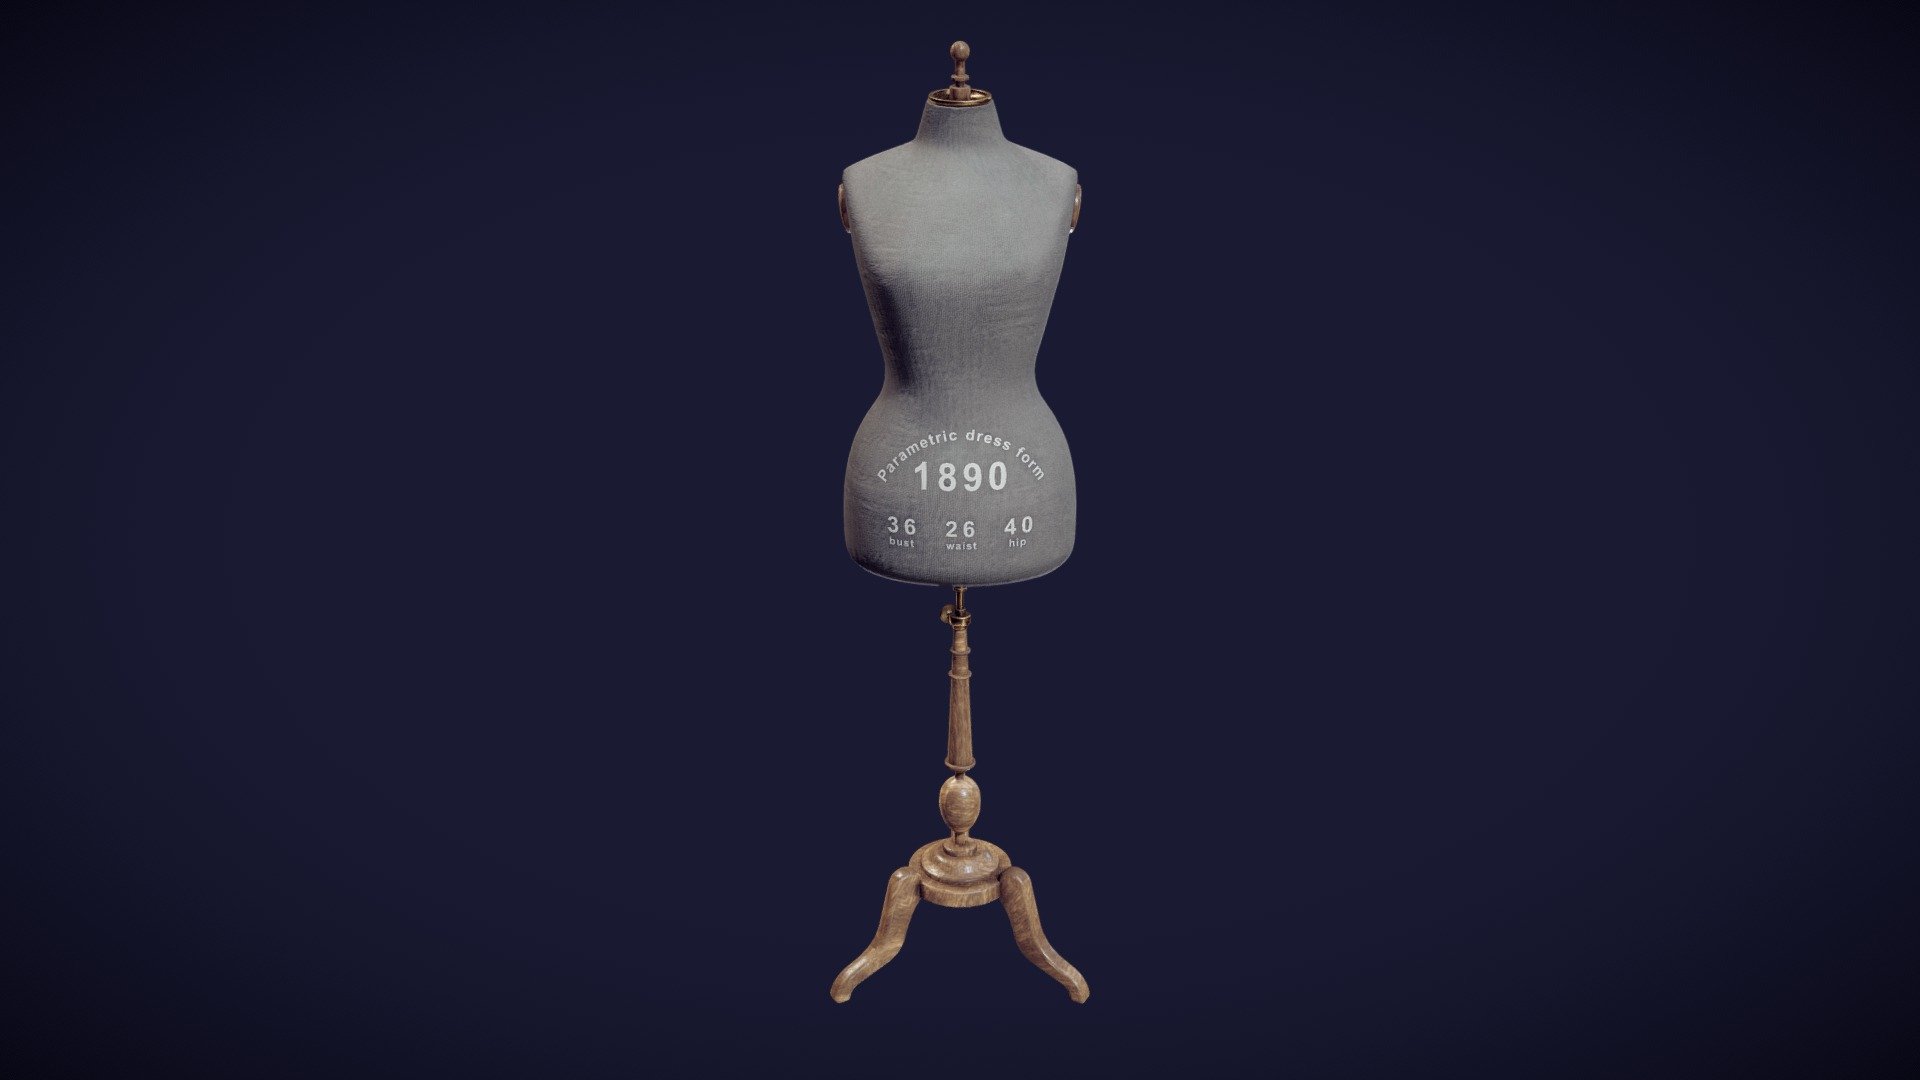 The 3D model presents a historical mannequin (a dress form) dating to 1890. The virtual mannequin was generated automatically by using a new method of parametric modelling (for further details see https://doi.org/10.1108/IJCST-06-2019-0093). The values of body measurements were taken from a sizing table published in “The Cutters Practical Guide to the Cutting of Ladies’ Garments” (V.D.F. Vincent, 1890). The measurements of the mannequin are: bust – 36 inches; waist – 26 inches; hip – 40 inches. The authors of the 3D model are

Aleksei Moskvin https://independent.academia.edu/AlekseiMoskvin

Mariia Moskvina https://independent.academia.edu/MariiaMoskvina

(Saint Petersburg State University of Industrial Technologies and Design)

DOI: http://dx.doi.org/10.13140/RG.2.2.10810.93121
https://www.researchgate.net/publication/357168647_1890_dress_form_size_36

The authors thank scientists from Ivanovo State Polytechnic University for providing information on historical mannequins 3d model